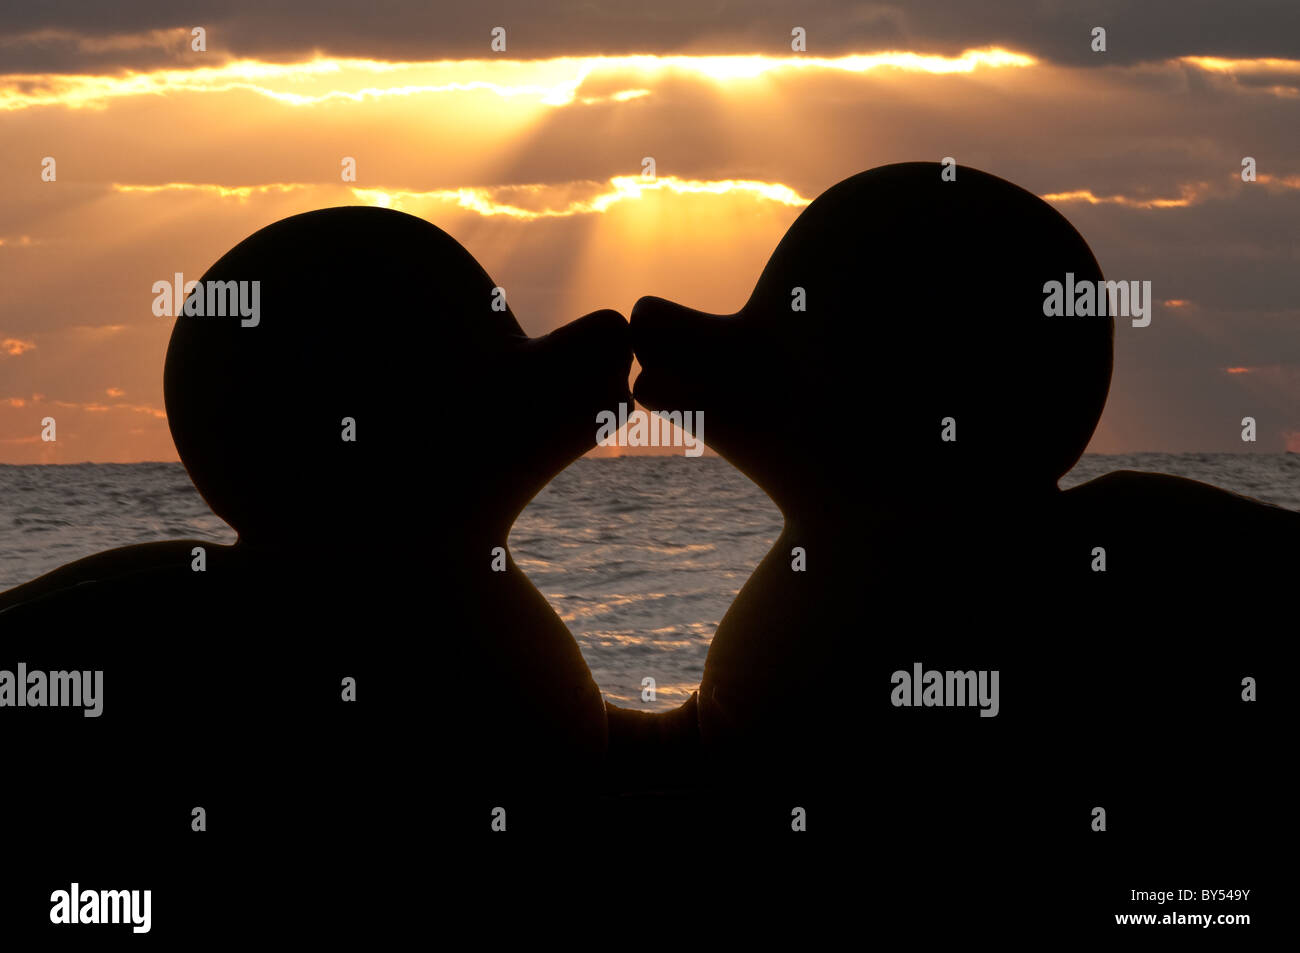 Rubber duckies kiss on the waterfront. Room for copy in the silhouette space. Stock Photo